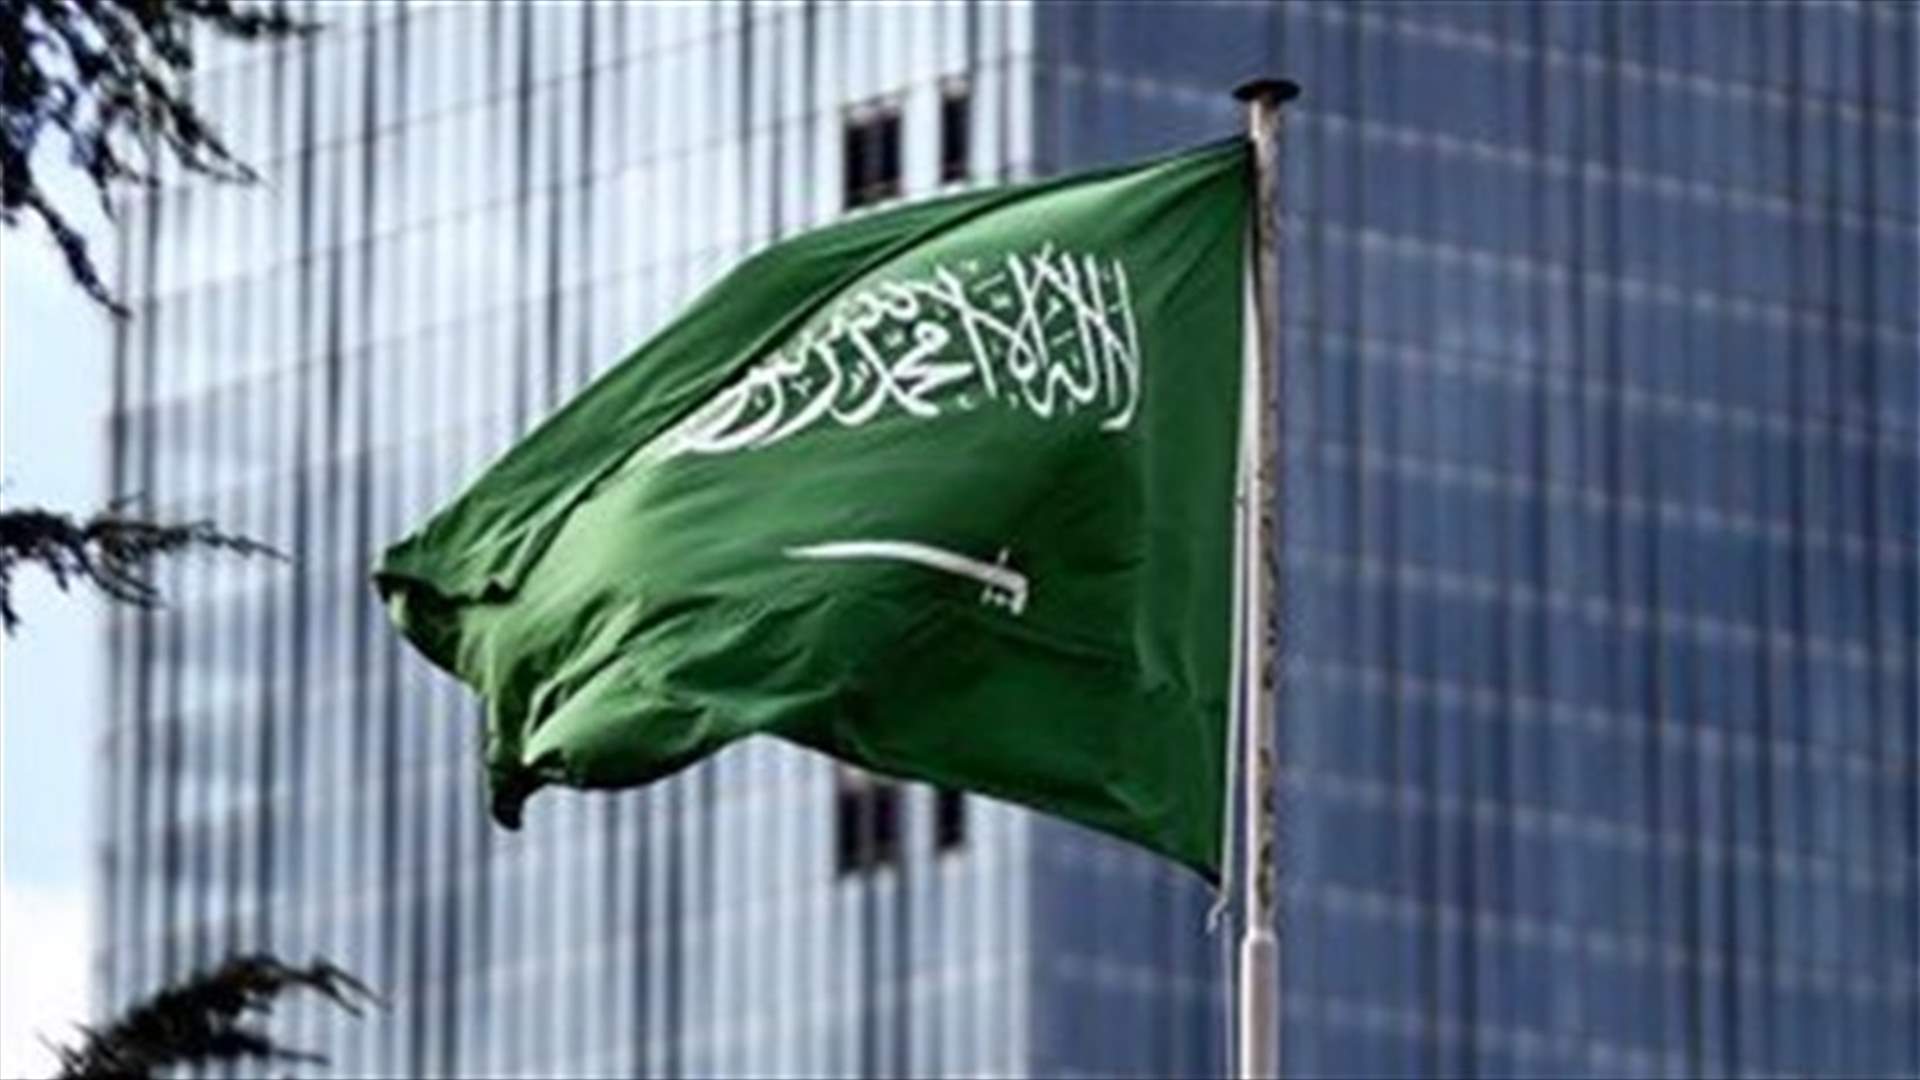 Saudi cabinet reshuffle brings ex-energy minister back as investment chief -SPA